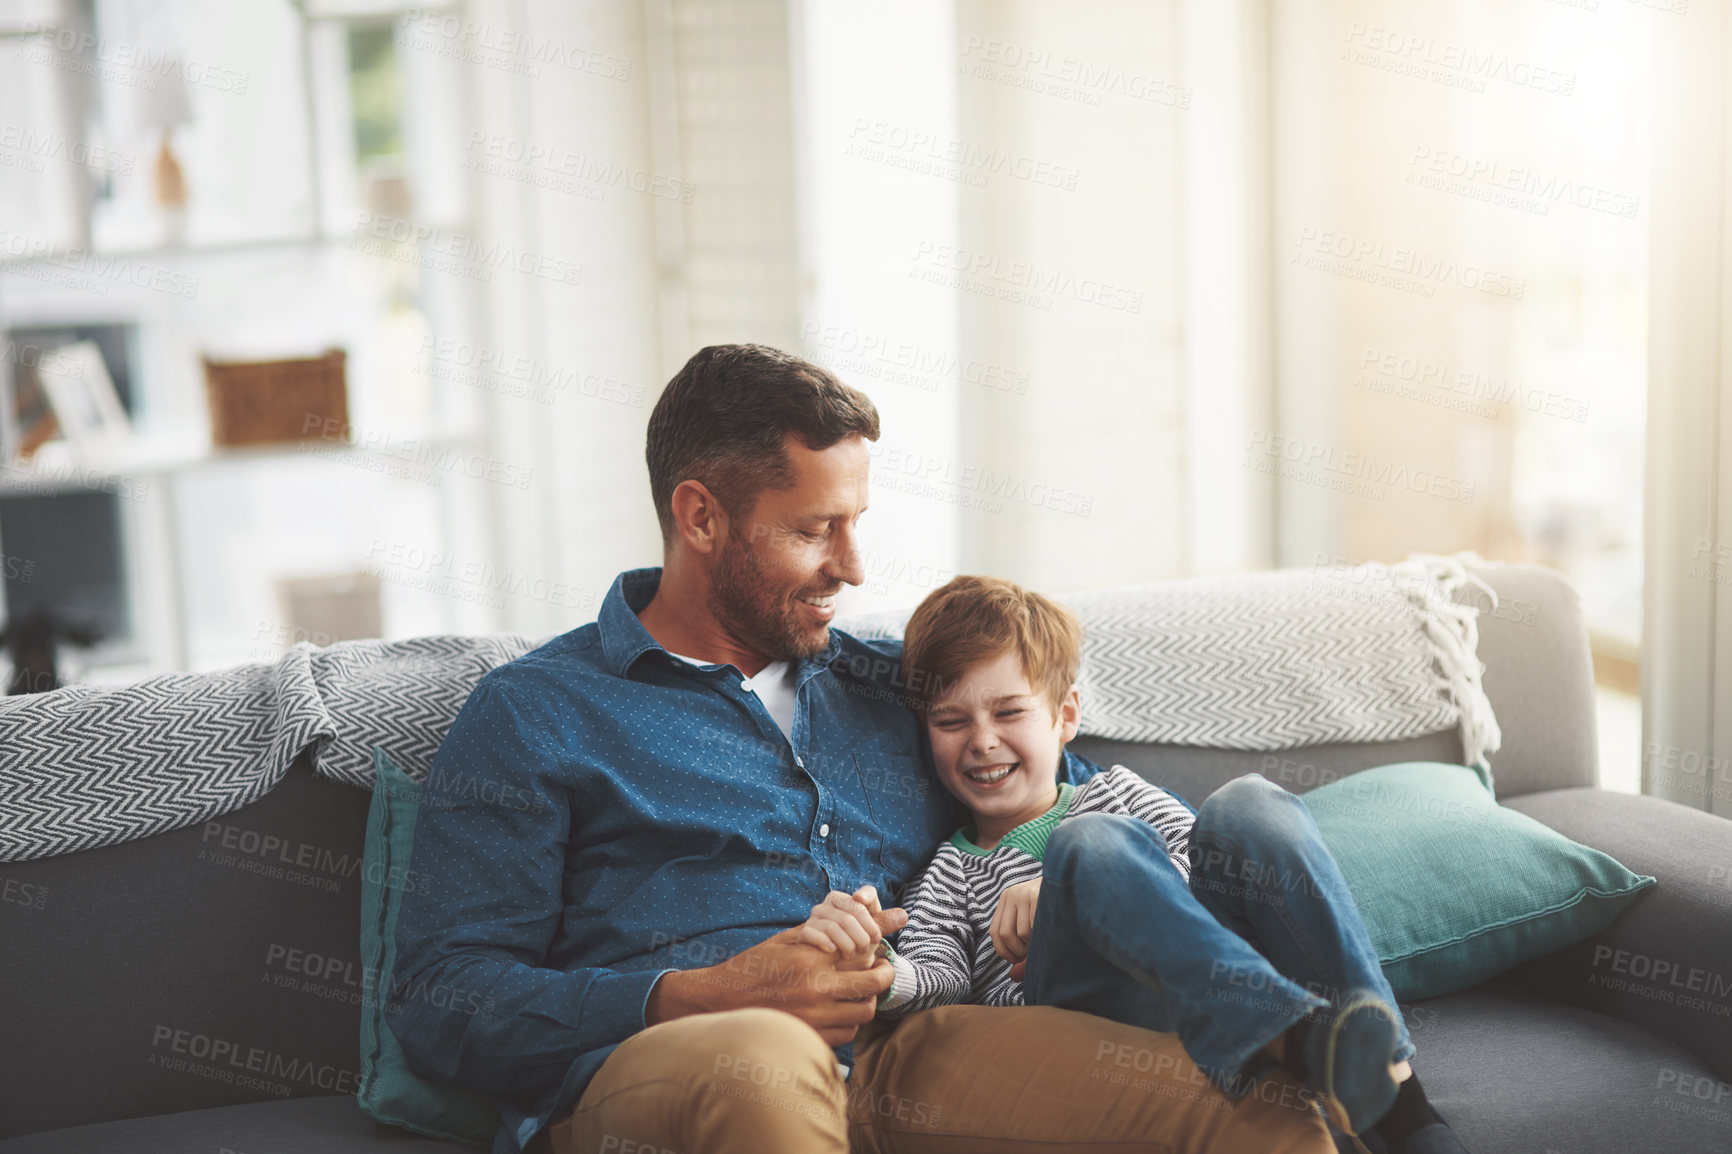 Buy stock photo Shot of a cheerful little boy and his father playing around together while being seated on a sofa together at home